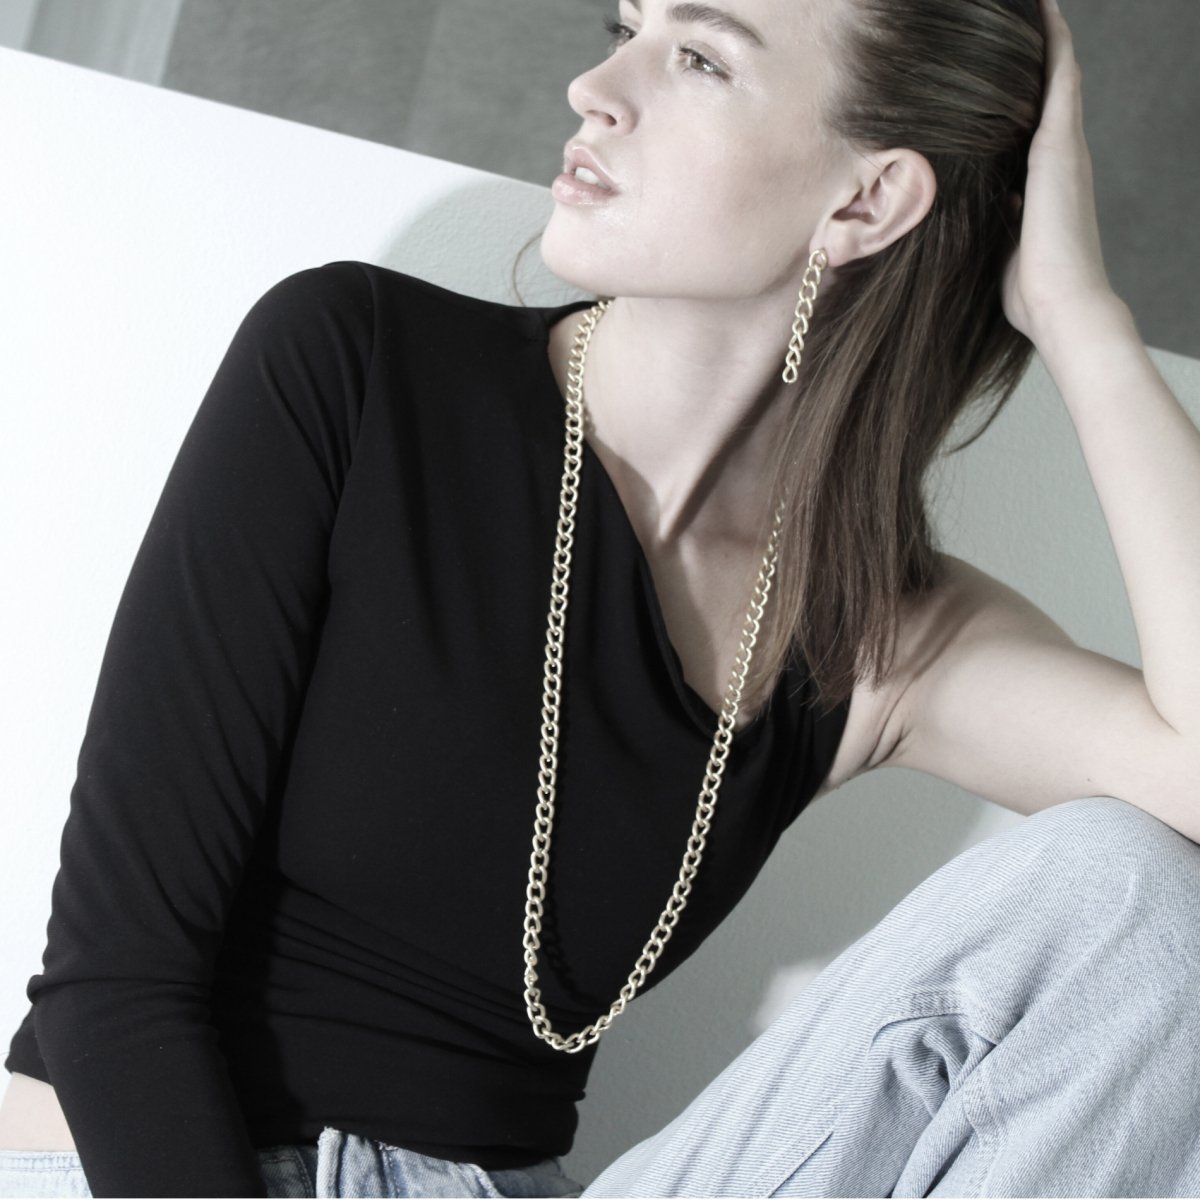 Tabitha IN:GREAT, collana a maglie lunghe, placcatura in oro - Infinity Concept Store